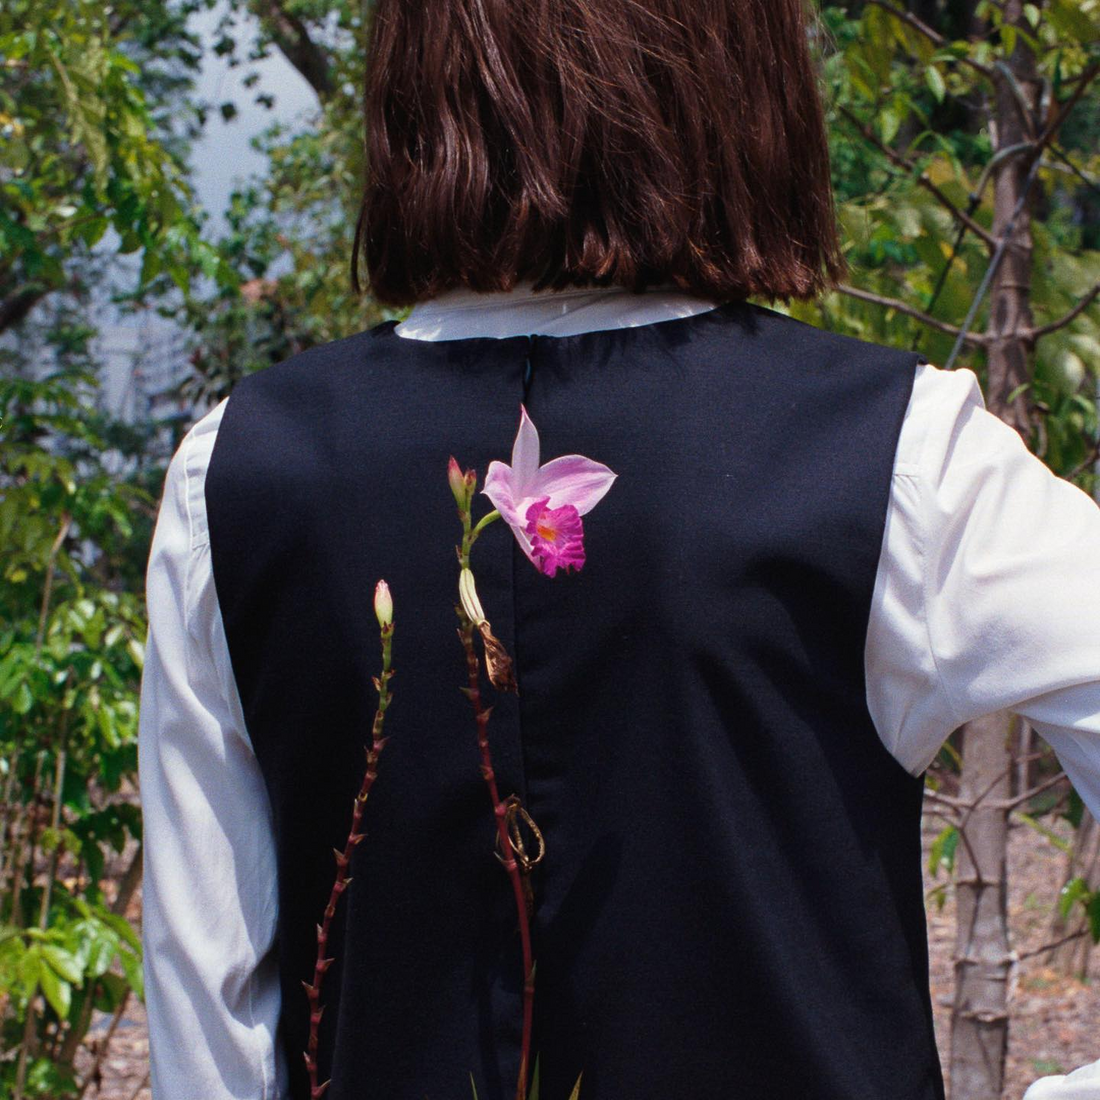 A woman with short brown hair has her back to the camera. She is standing in a forest. She is wearing a white shirt and navy blue waistcoat. She is holding a pink flower behind her back.